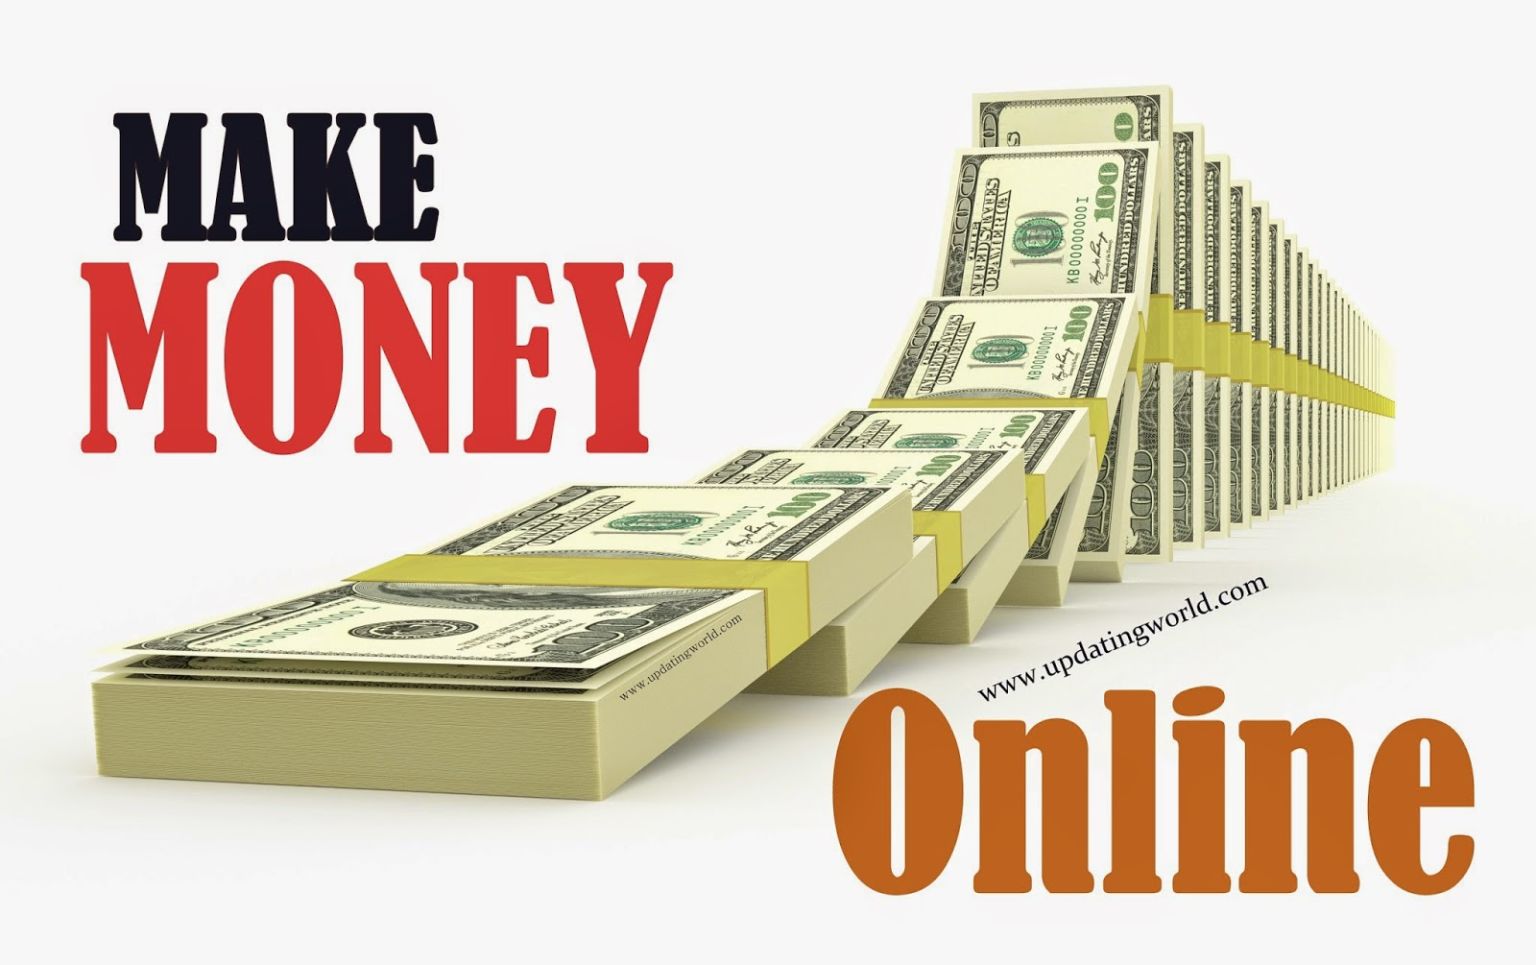 how to earn $1000 per month easily Wapka Site| Make Money With AdSense 1st part